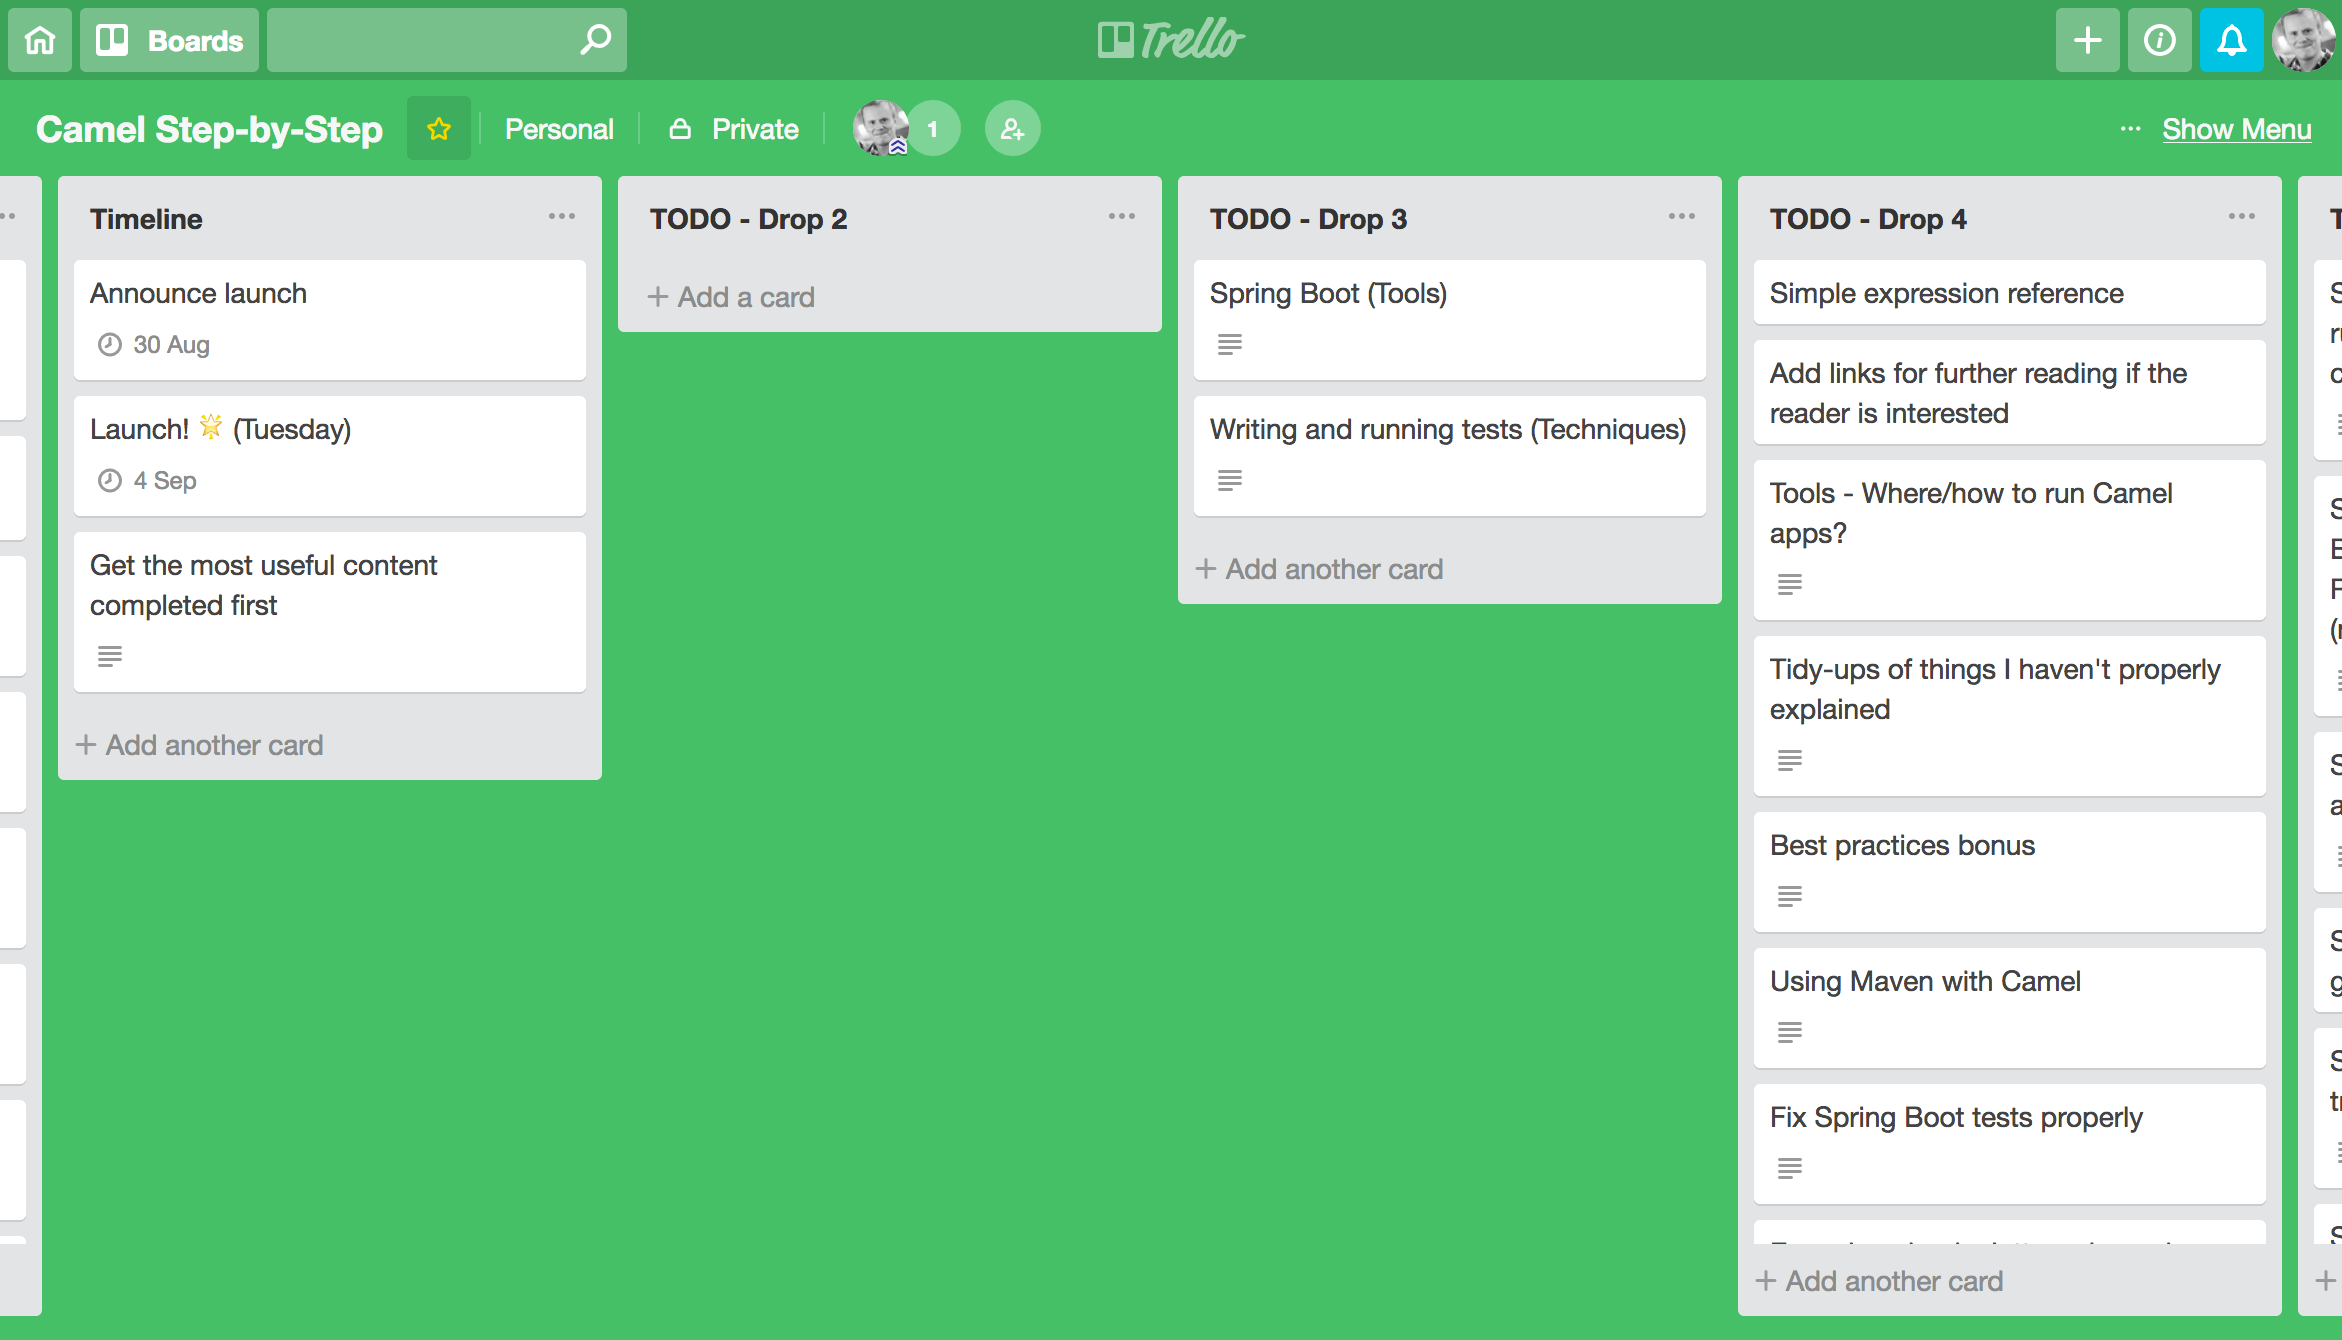 My Camel Step-by-Step board on Trello